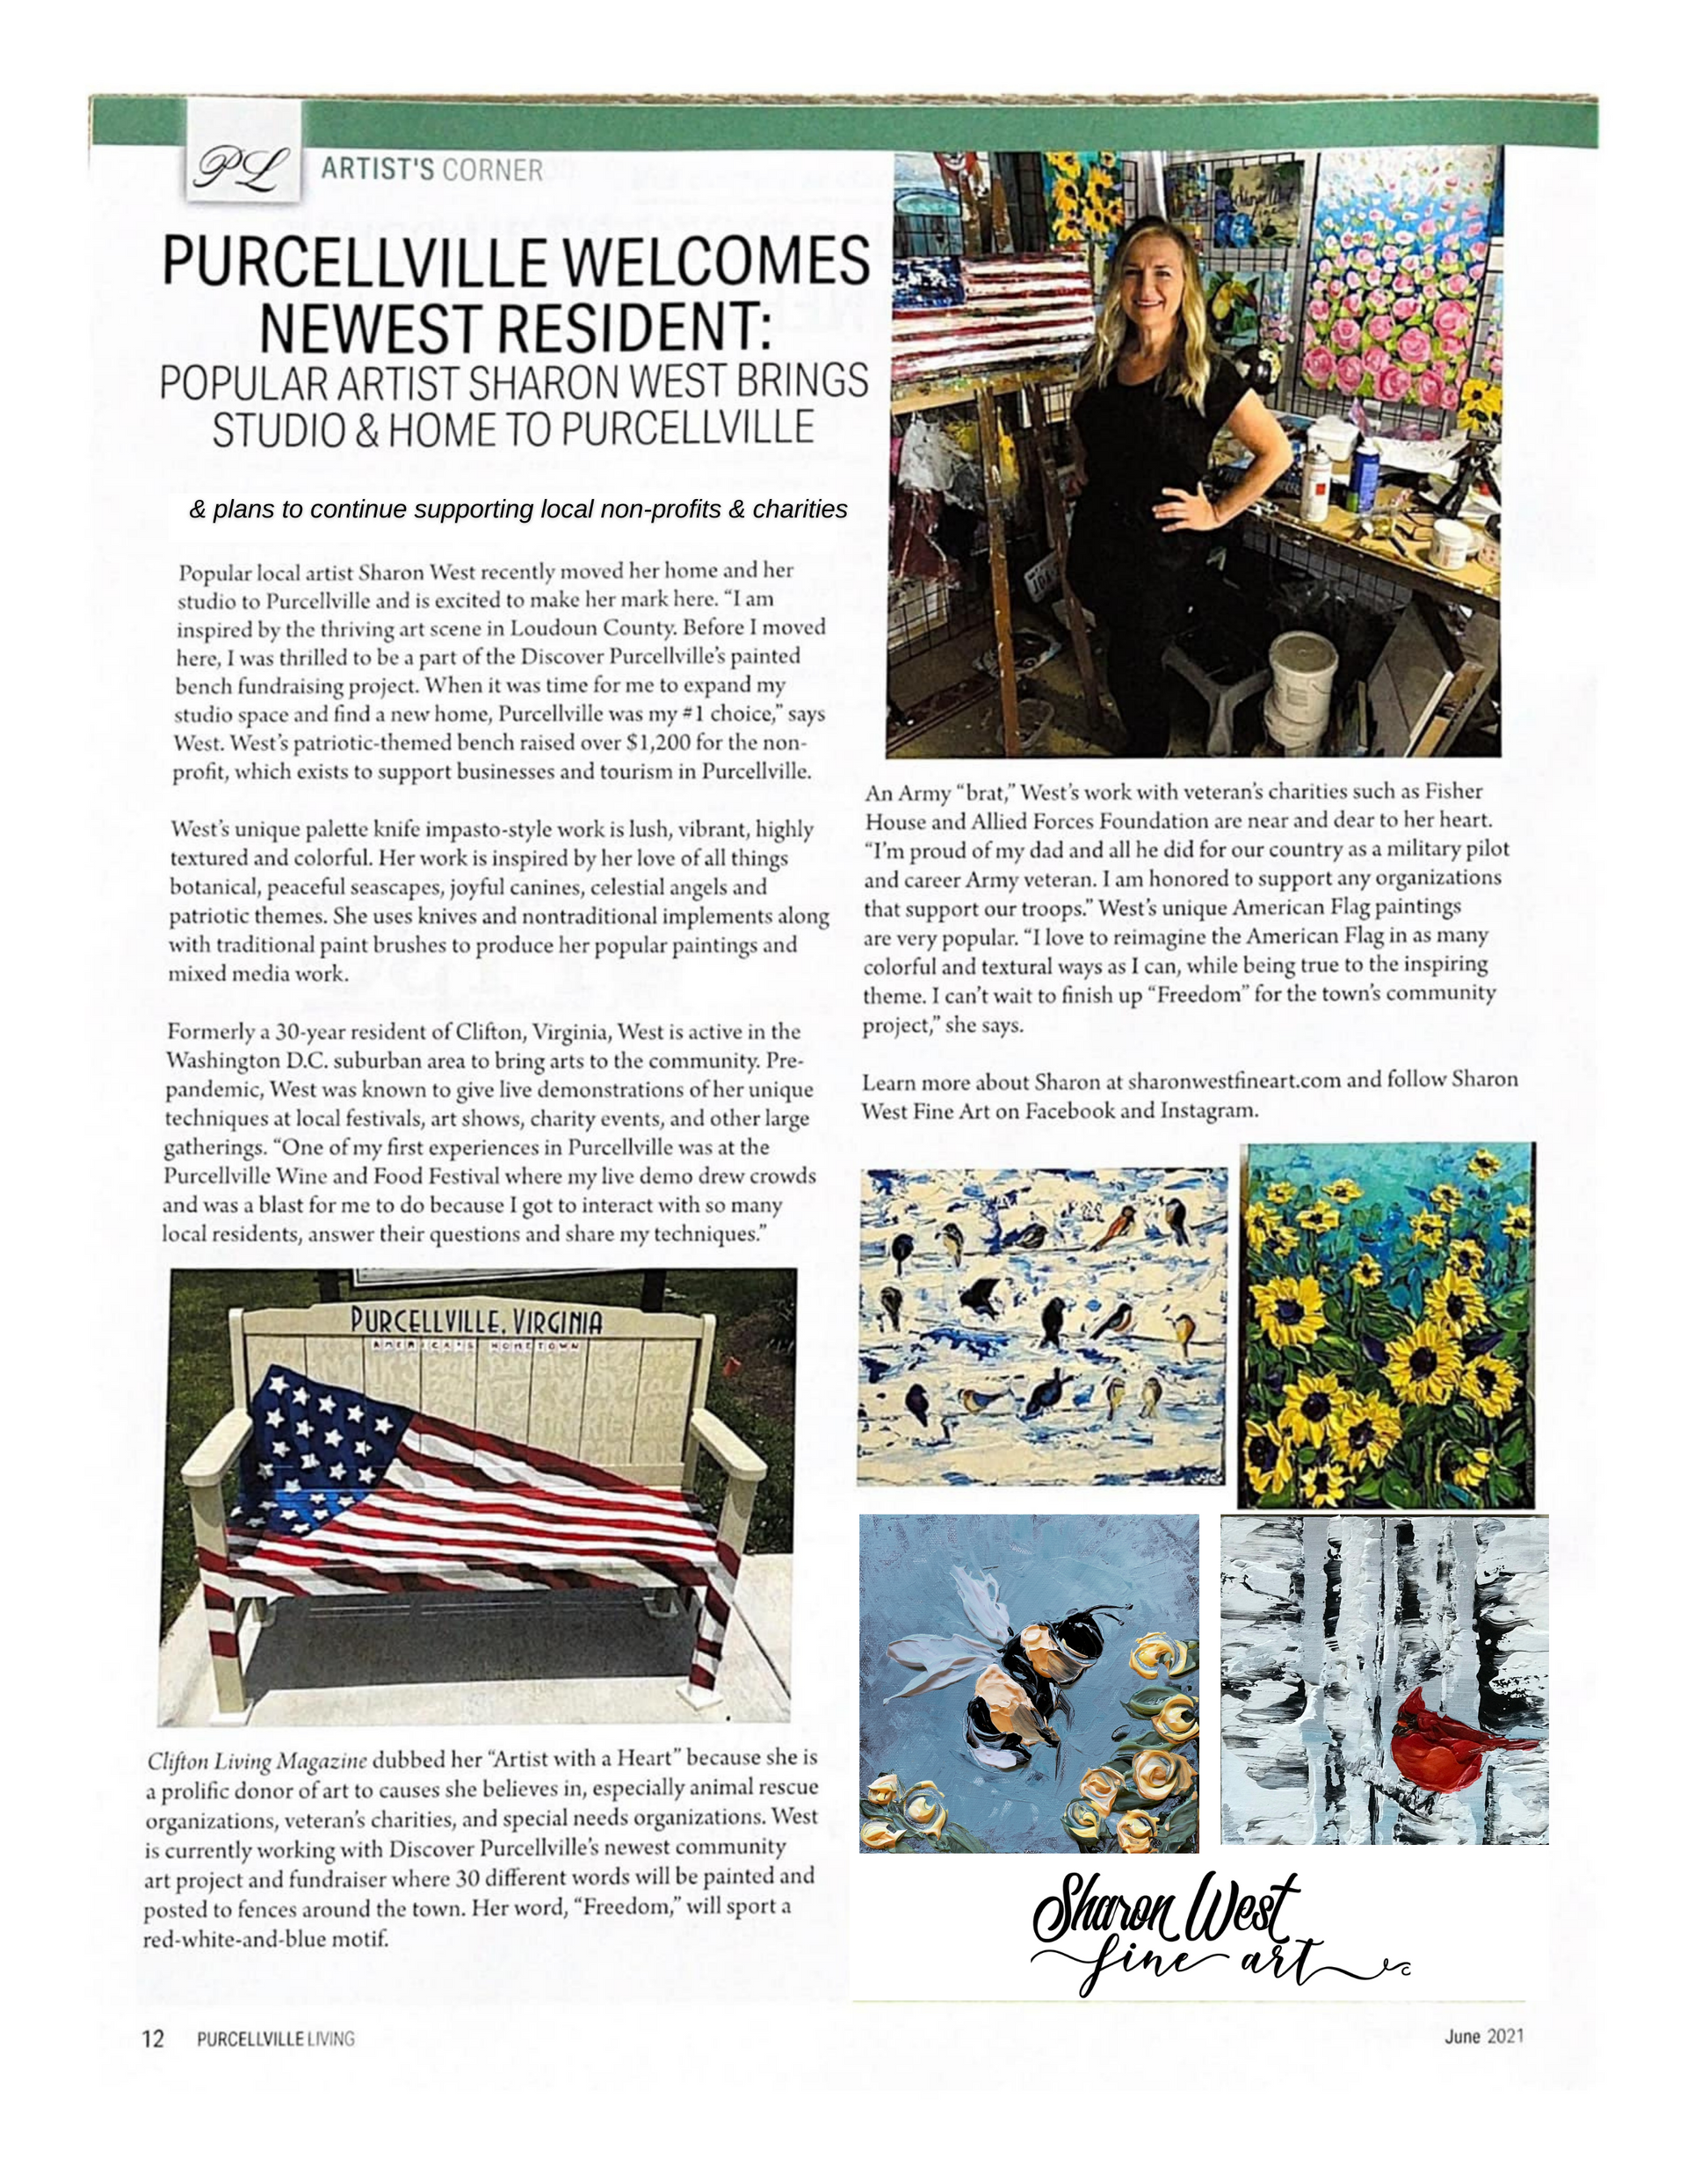 Honored to be featured in Purcellville Living Magazine!